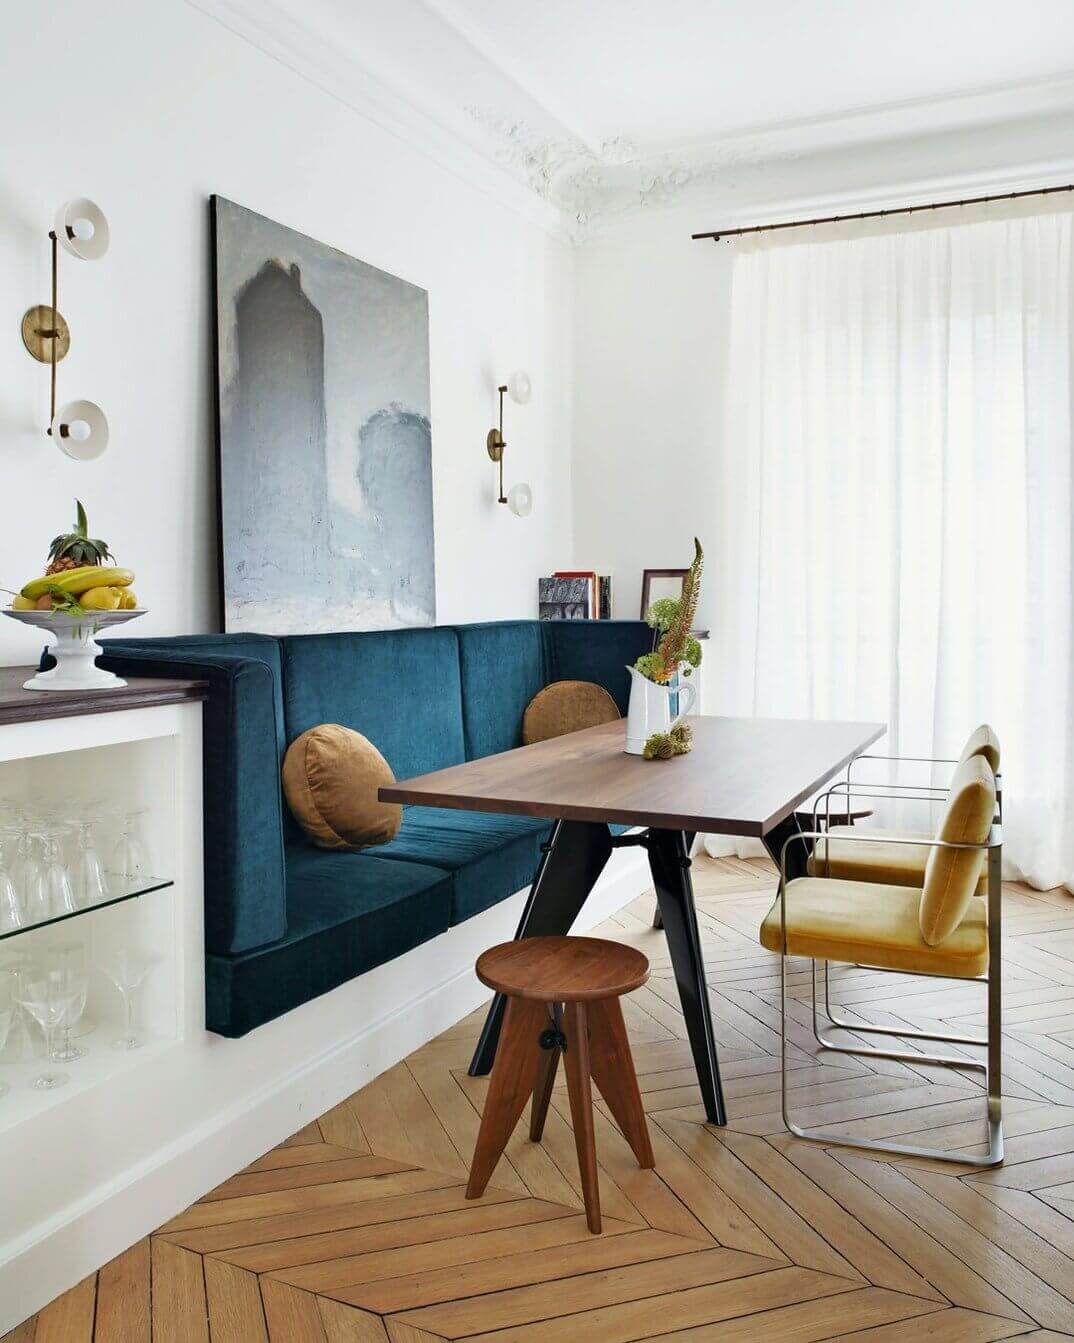 19th-paris-apartment-modern-classic-design-built-in-bench-nordroom